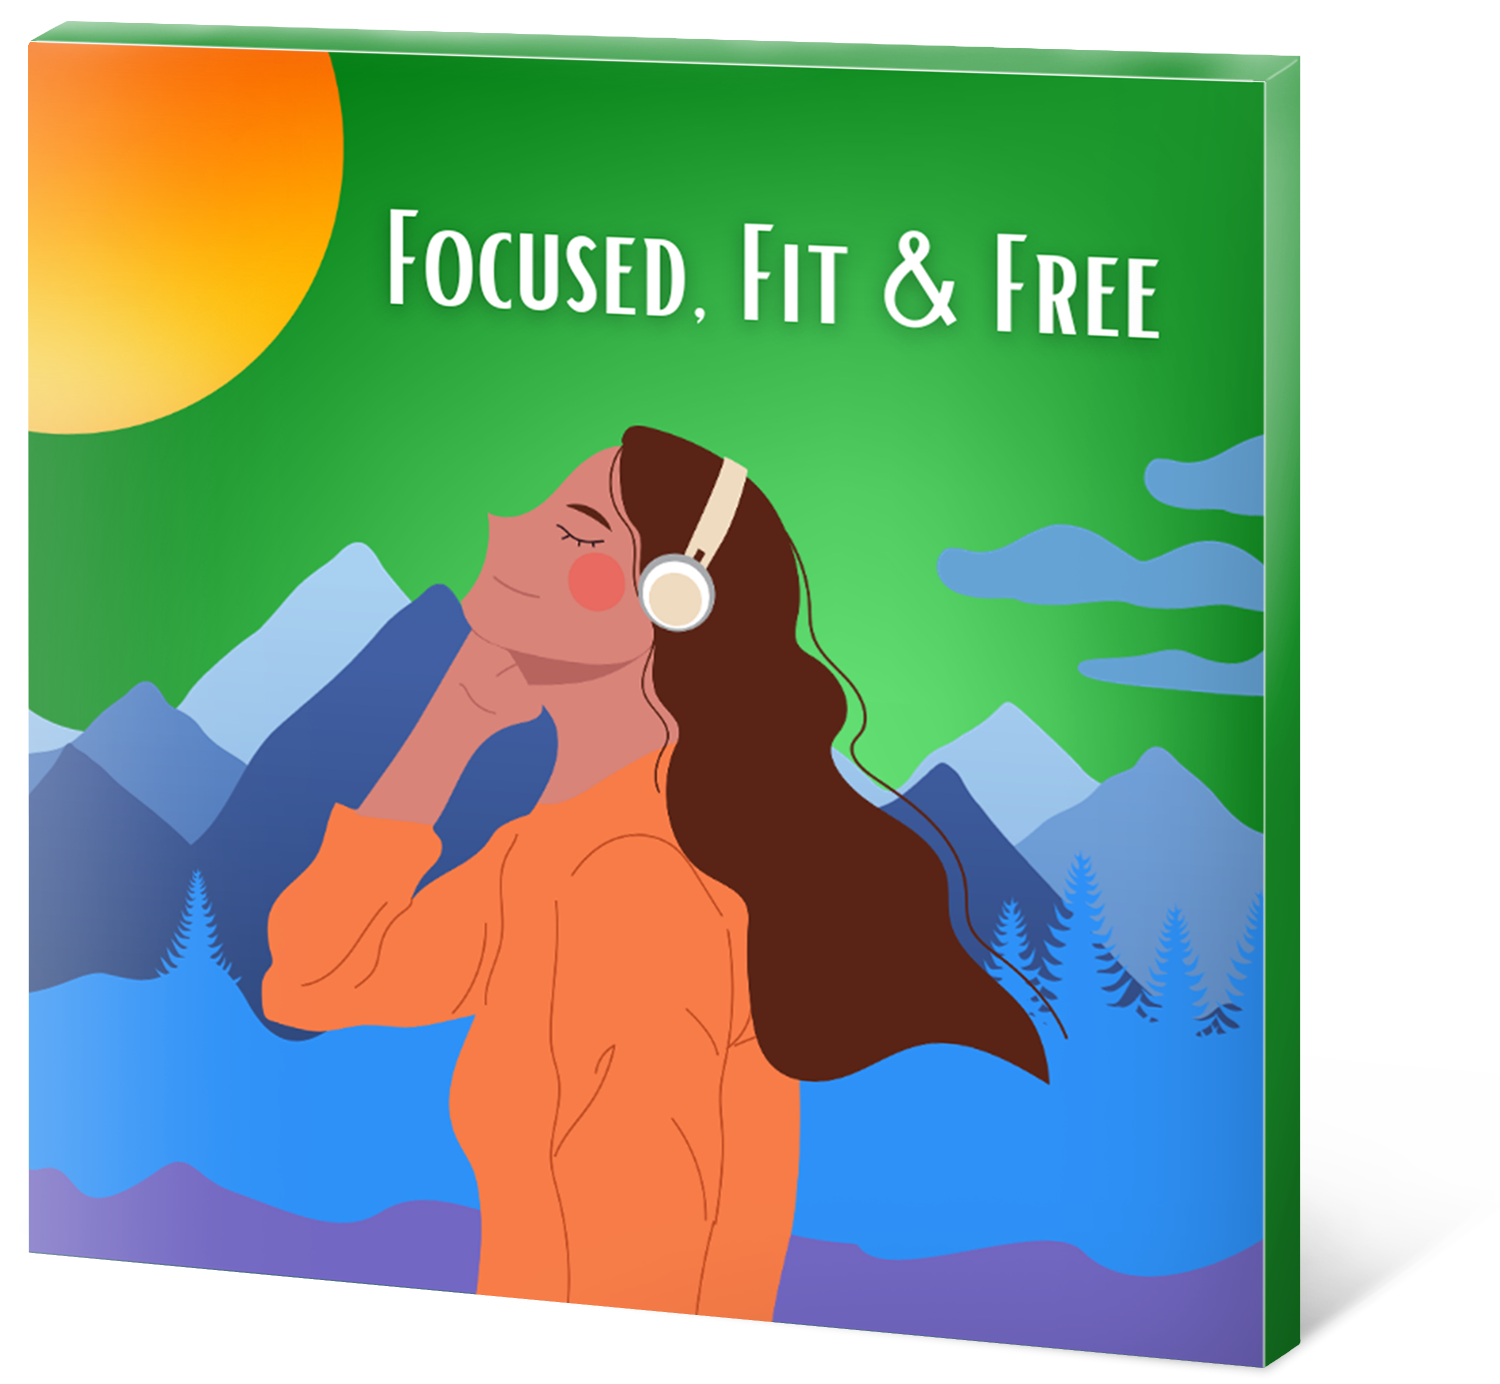 focused fit and free product image on a cd cover